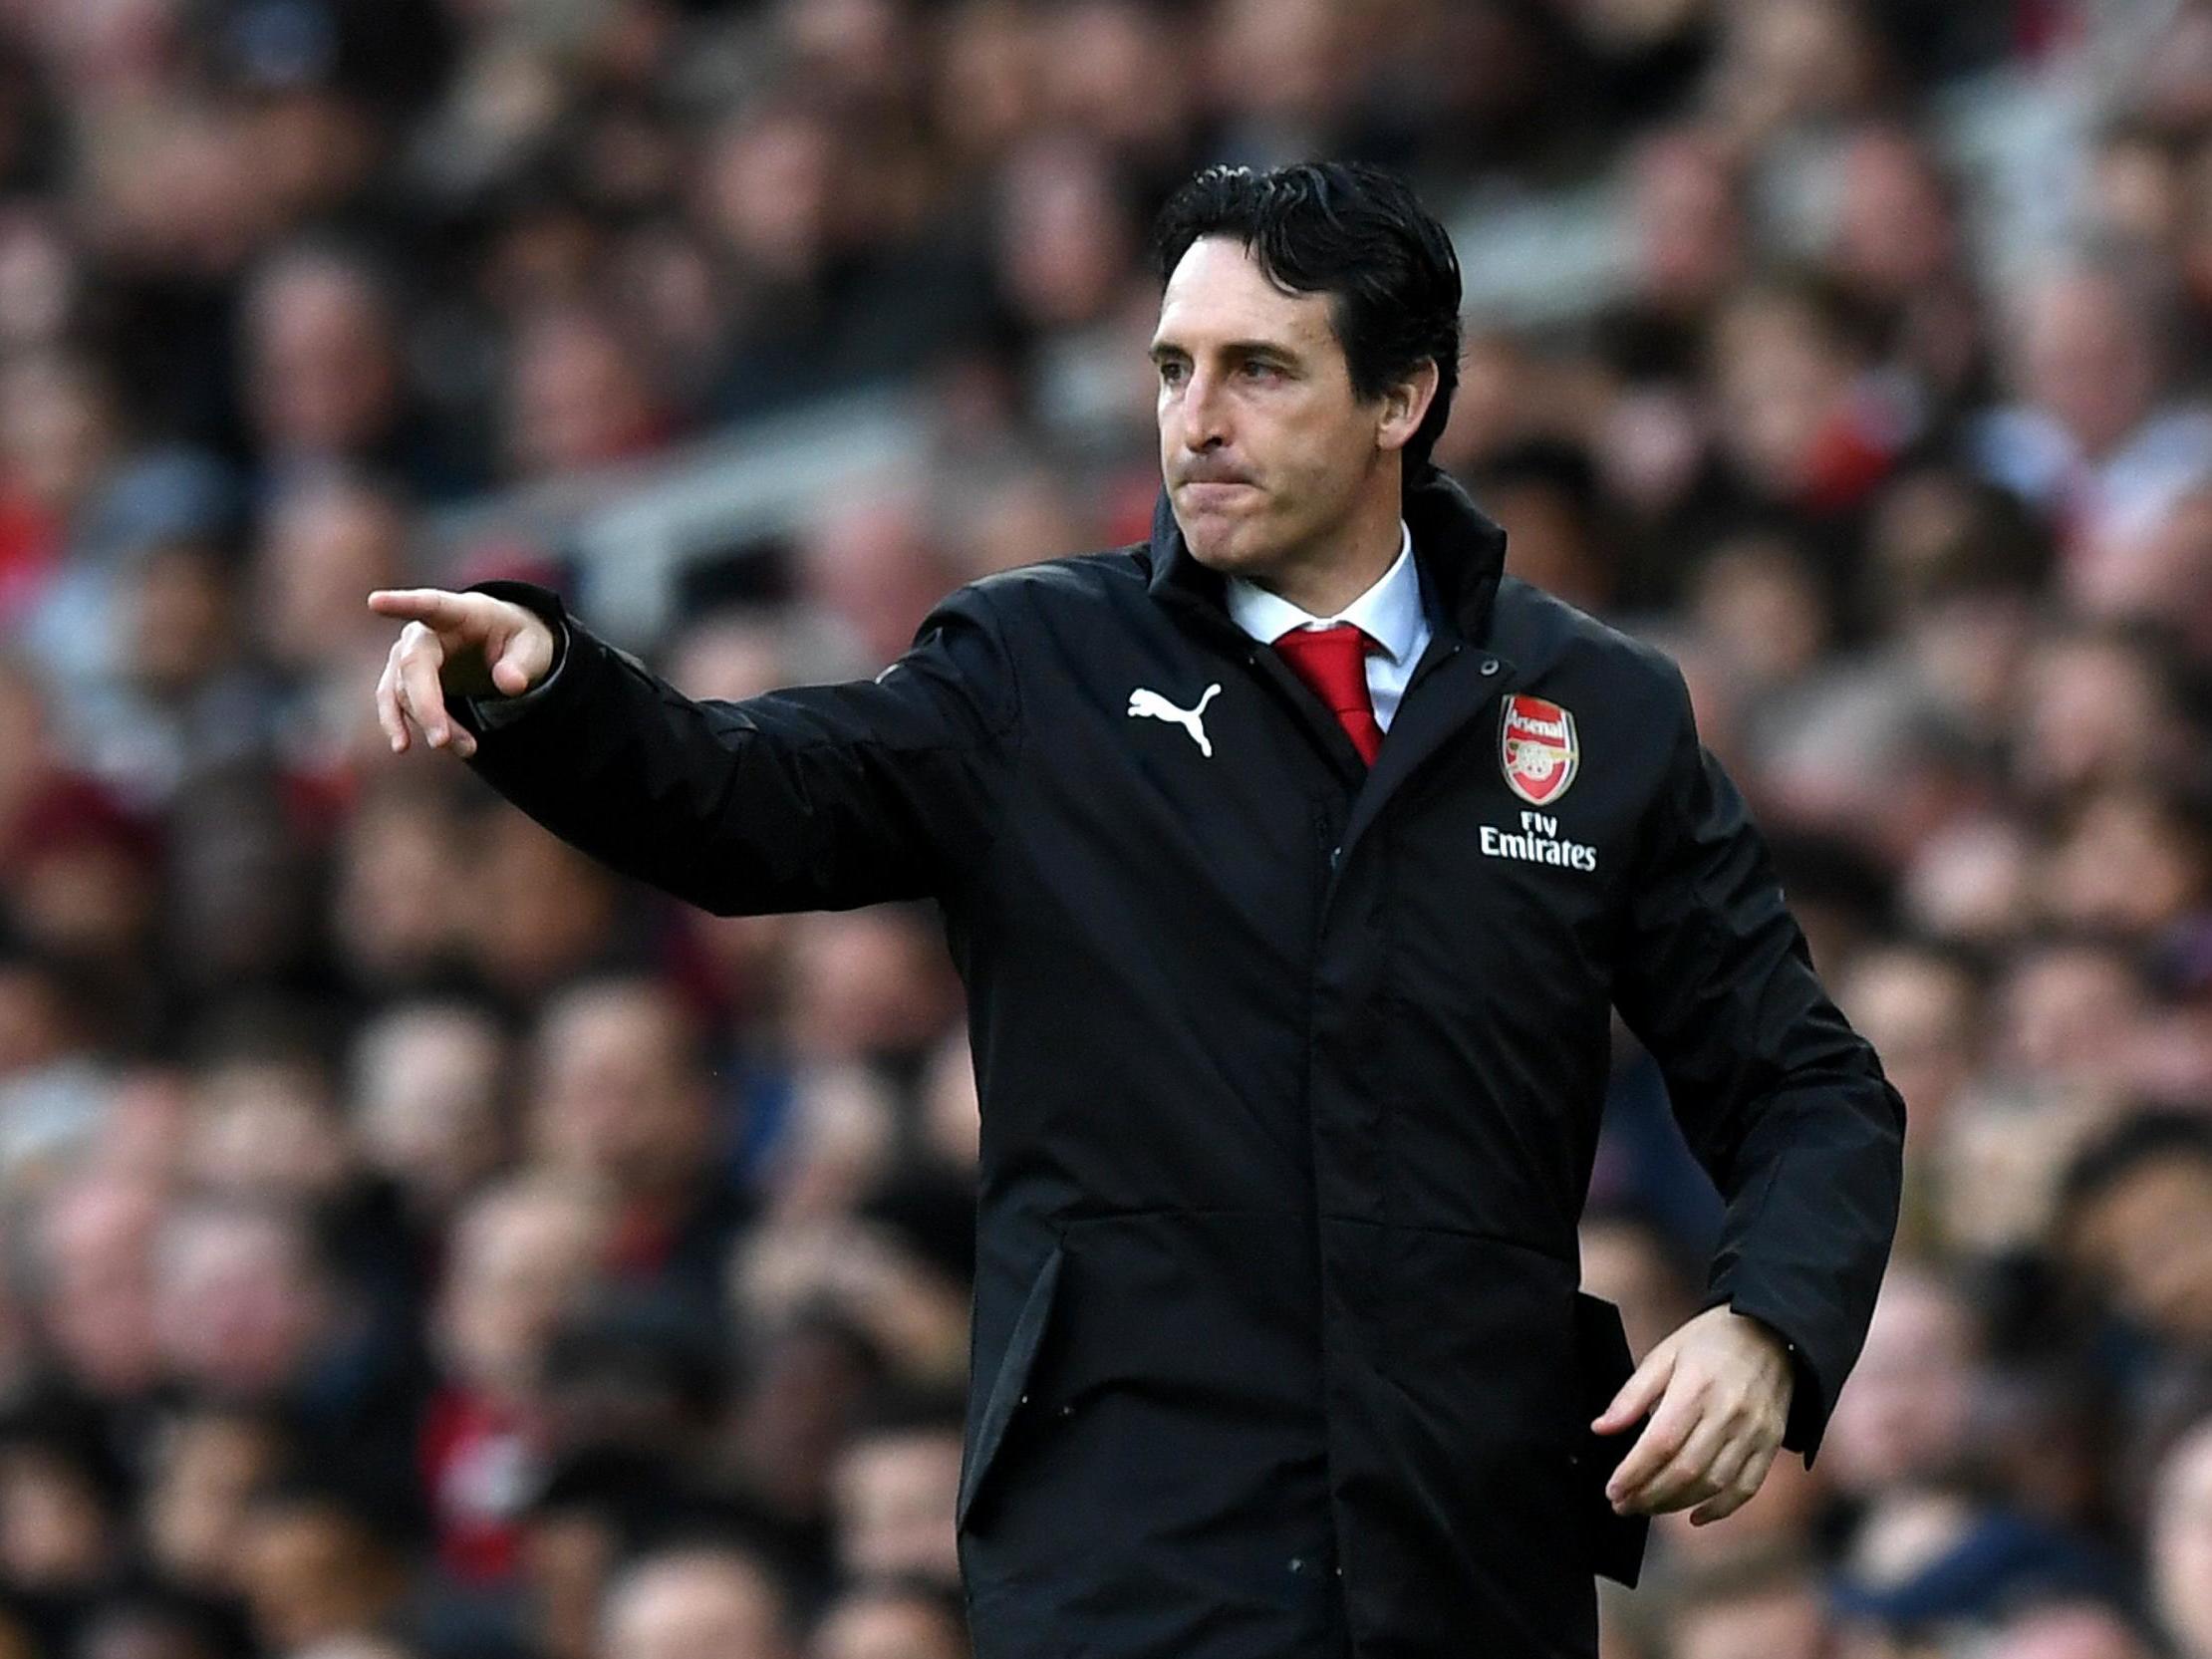 The Arsenal boss issues instructions from the sideline at the Emirates